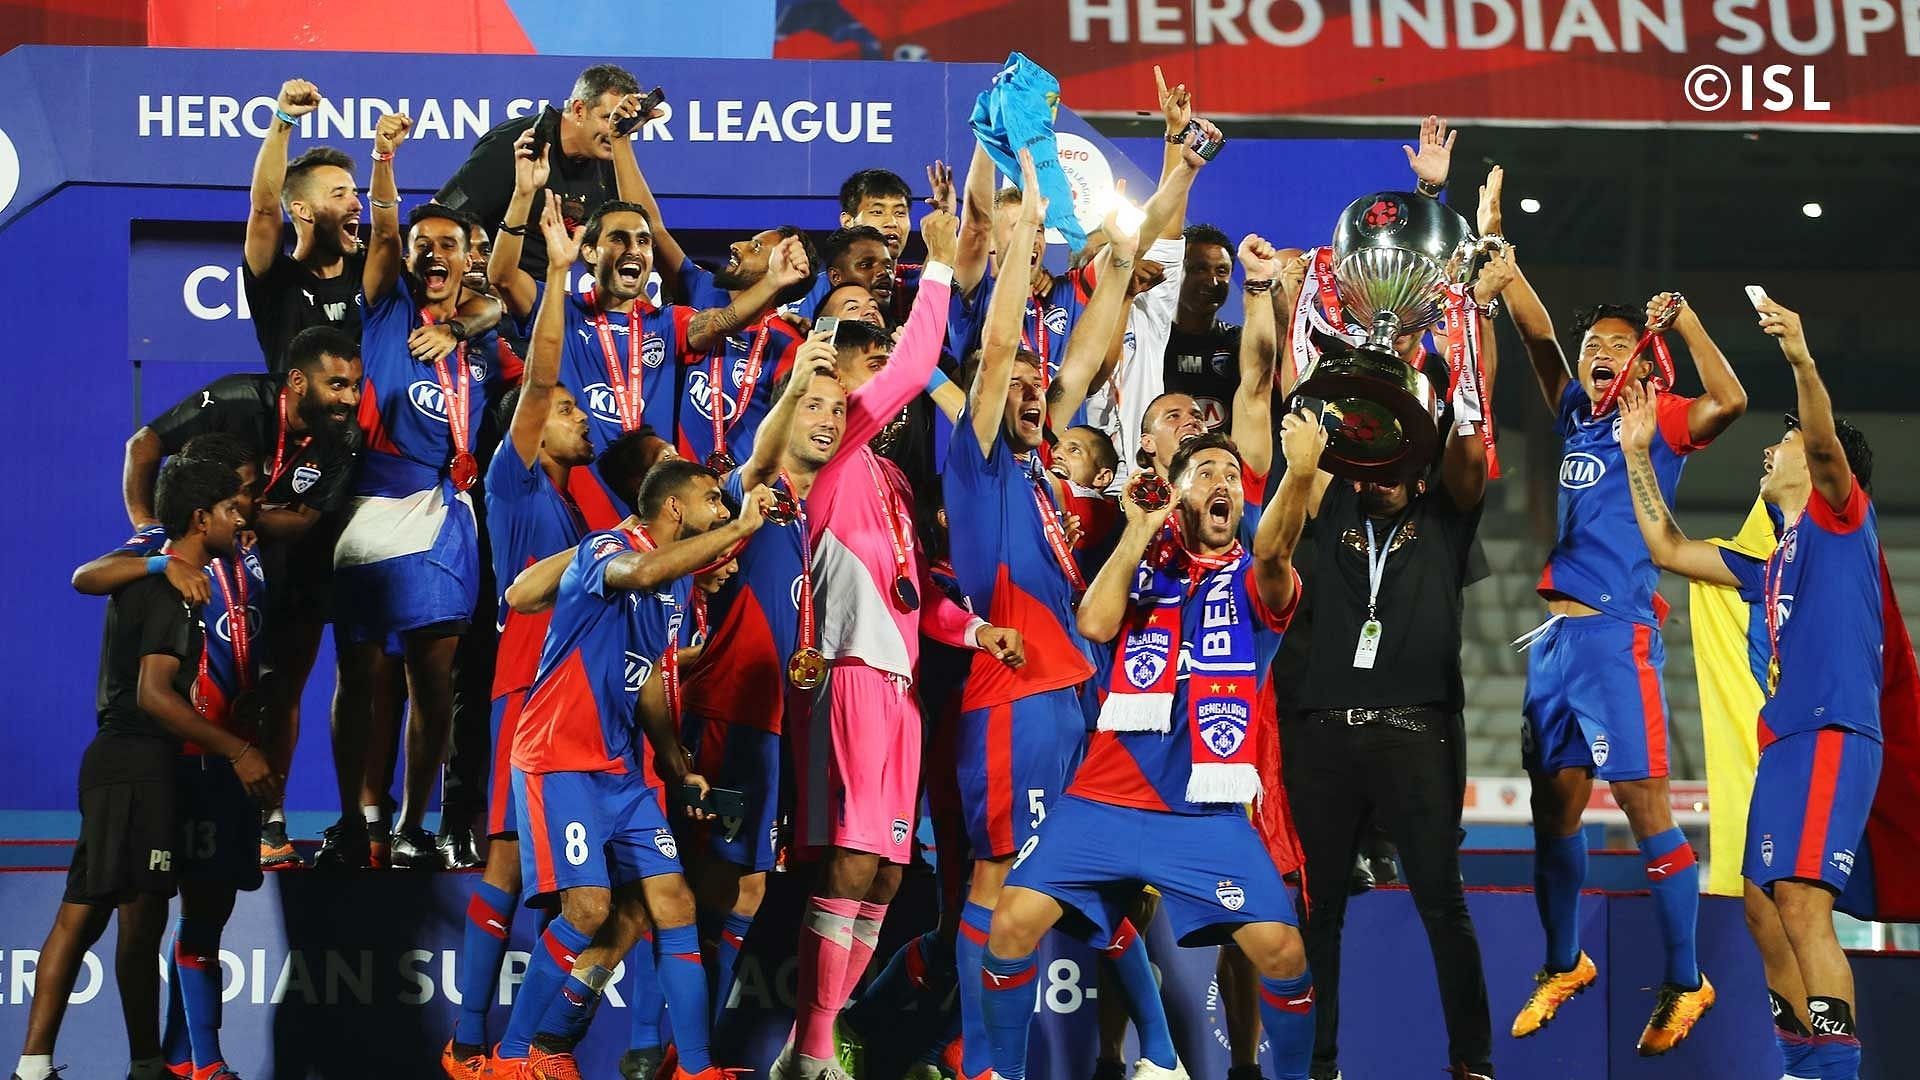 Bengaluru FC were crowned ISL champions for the first time after defeating FC Goa 1-0 (after extra time) in the 2018/19 final at Mumbai.